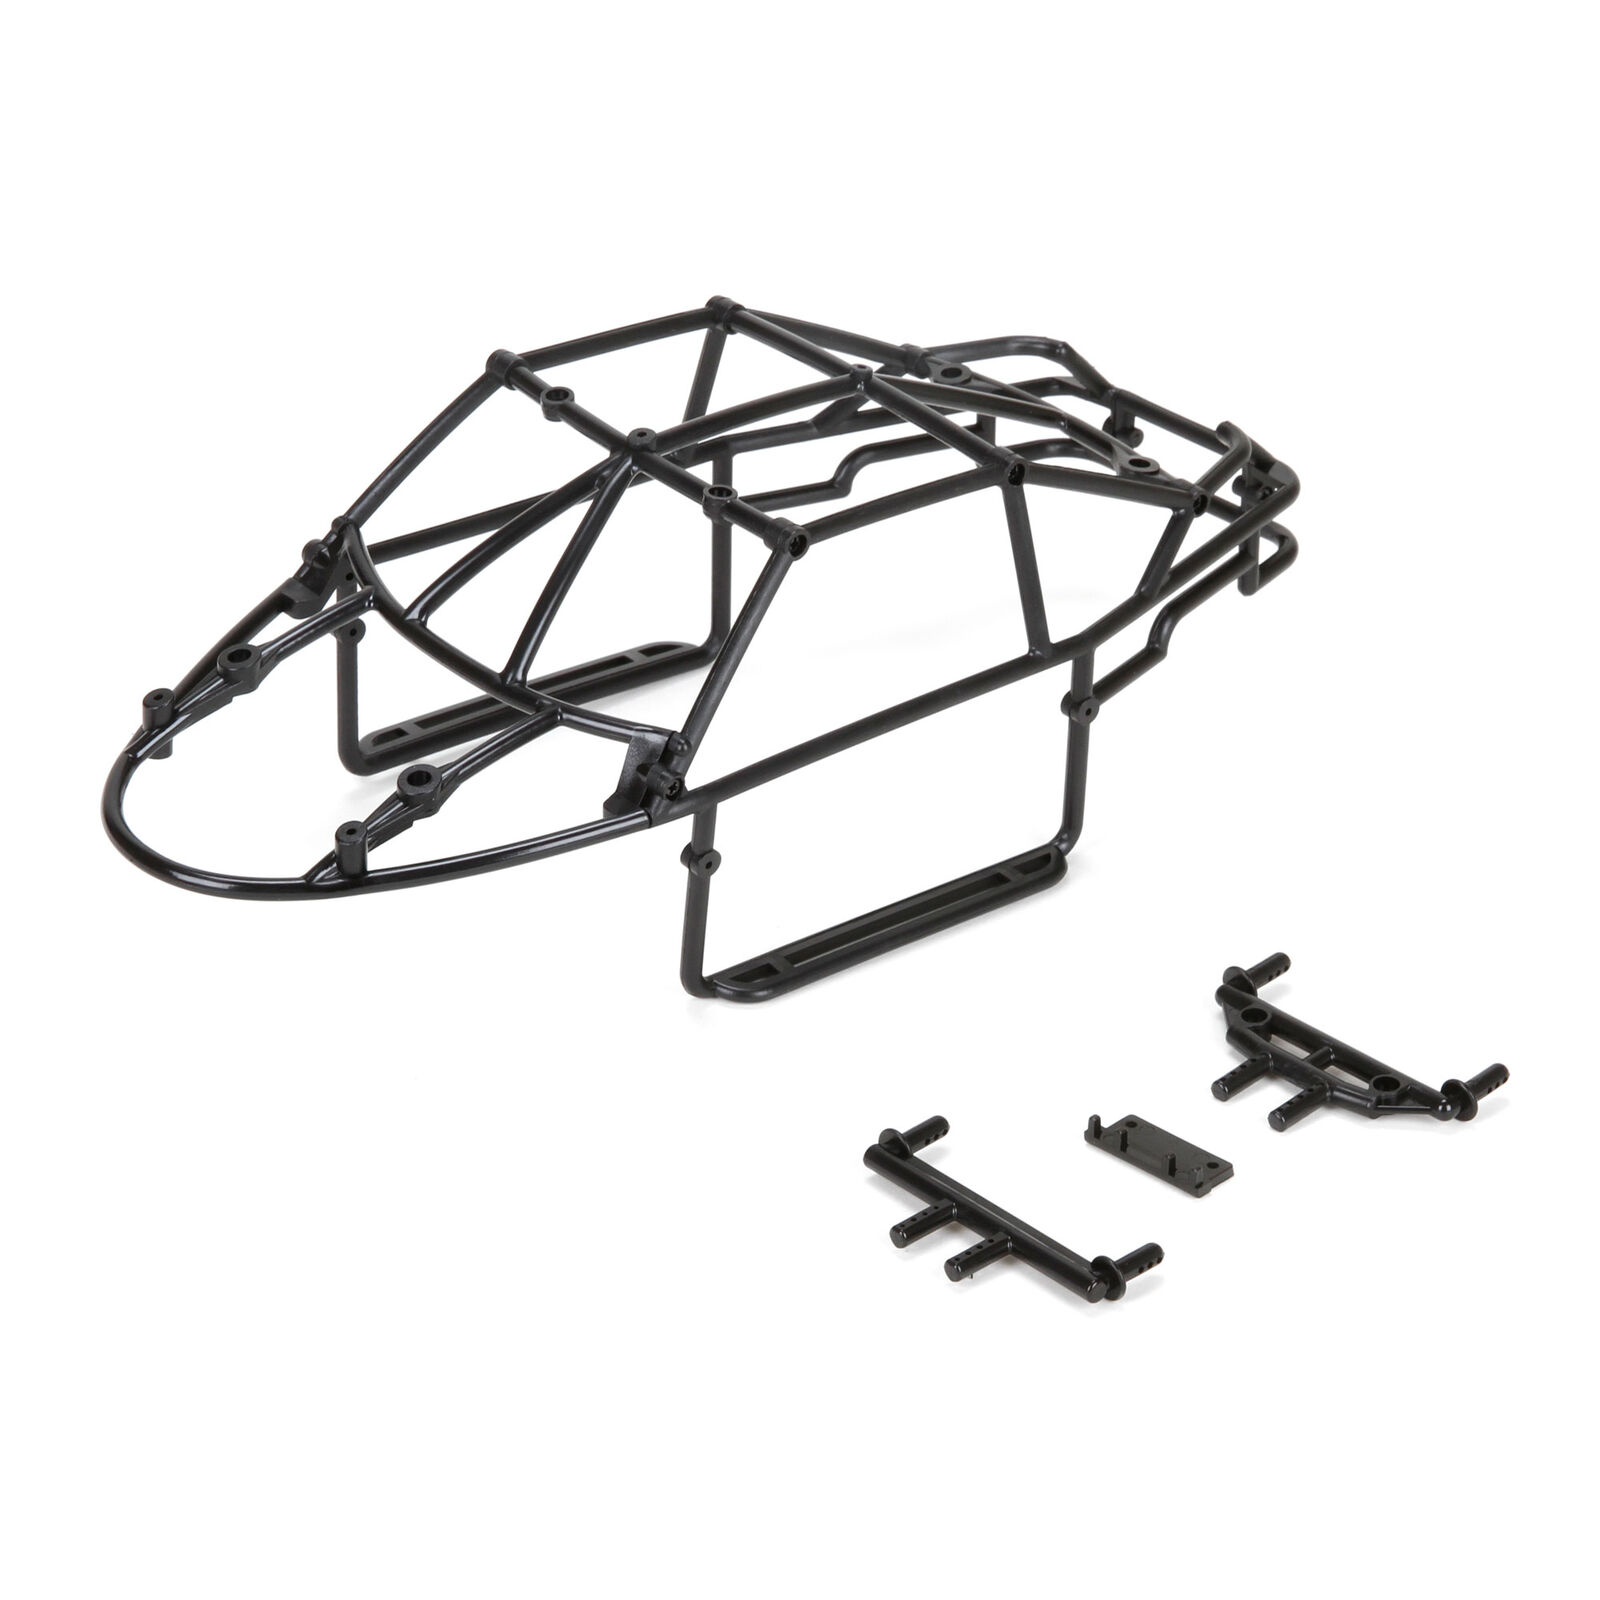 1:18 4WD Roost - Arceau cage complet